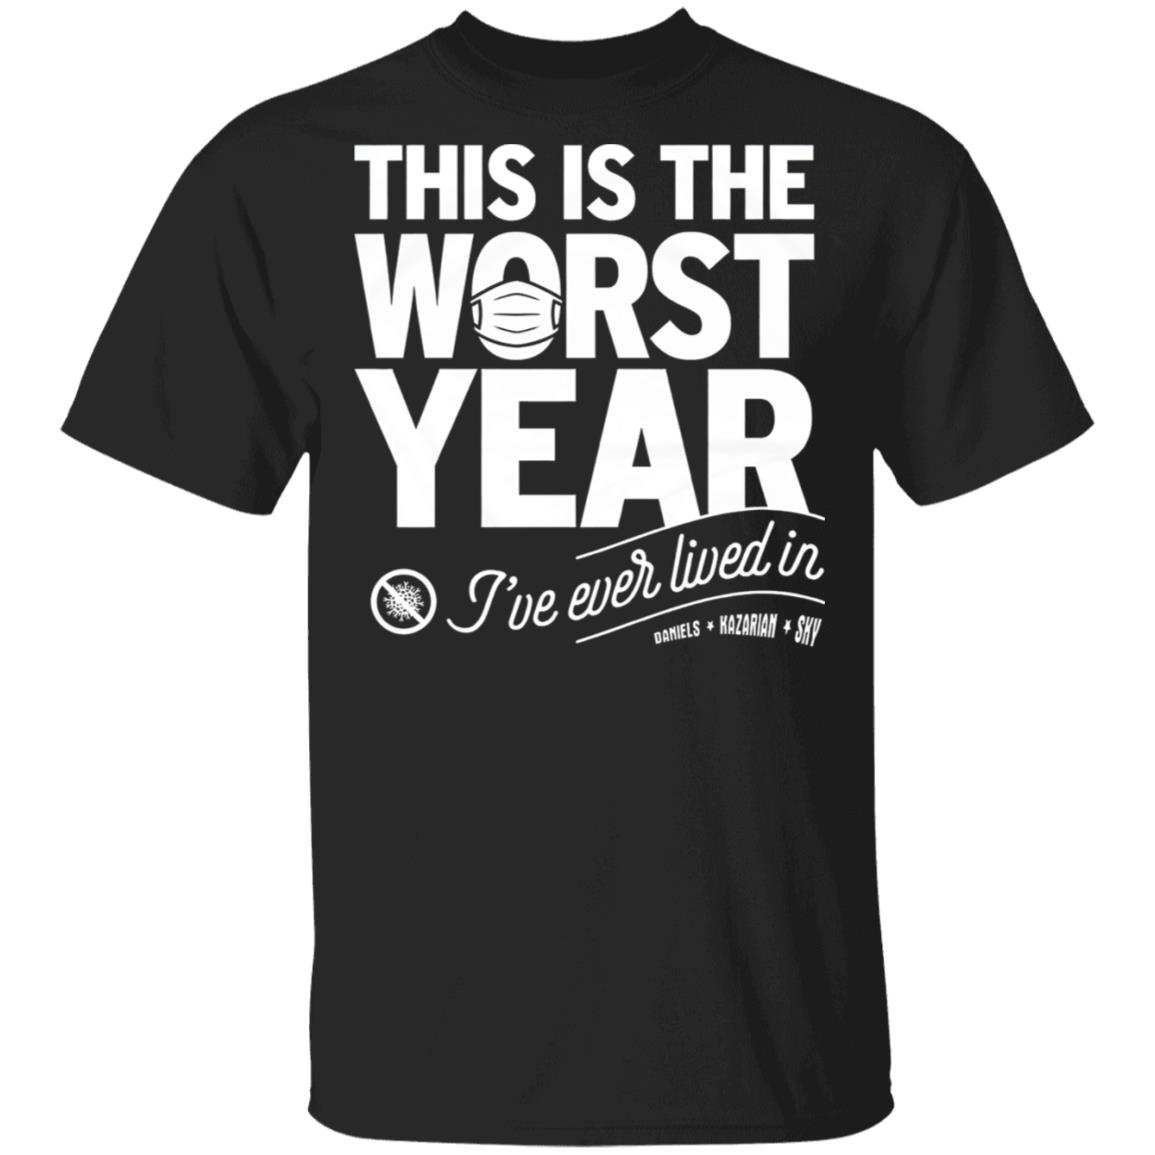 This is the worst year I've ever lived in TShirt